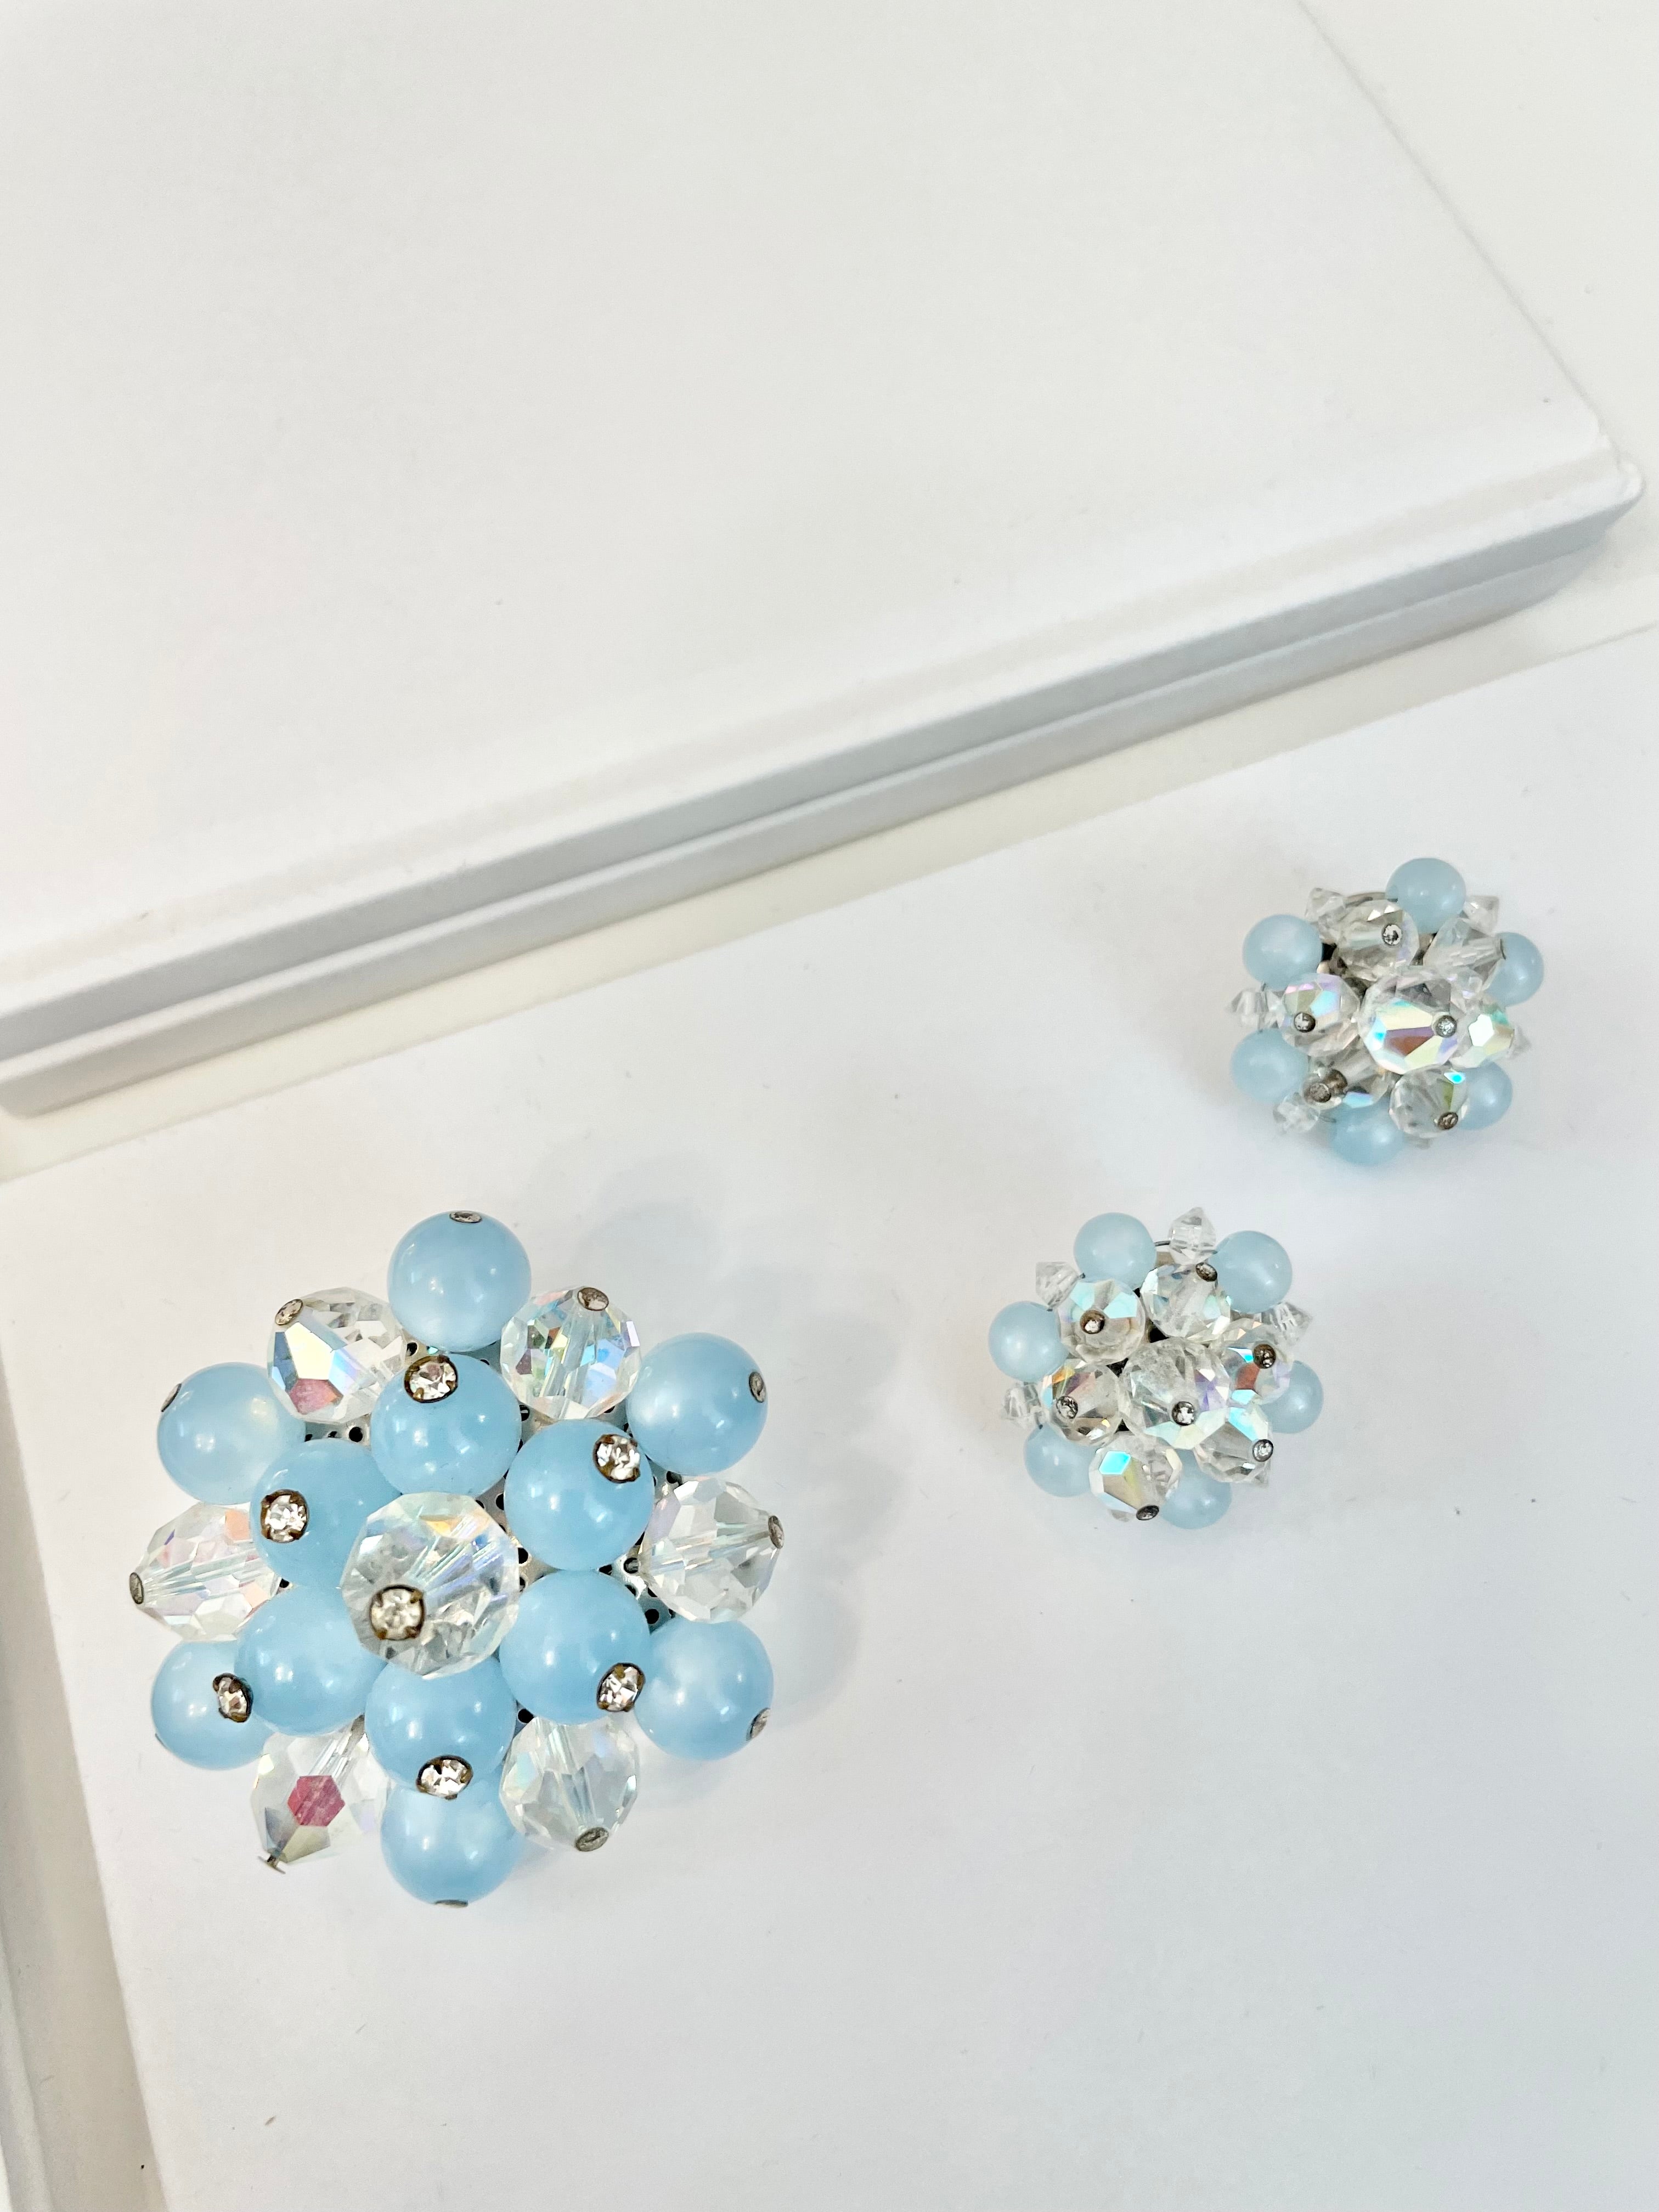 1960's Heiress and her love of the classic brooch, and matching earrings. Oh my! The soft blue with Austrian crystals is truly divine.